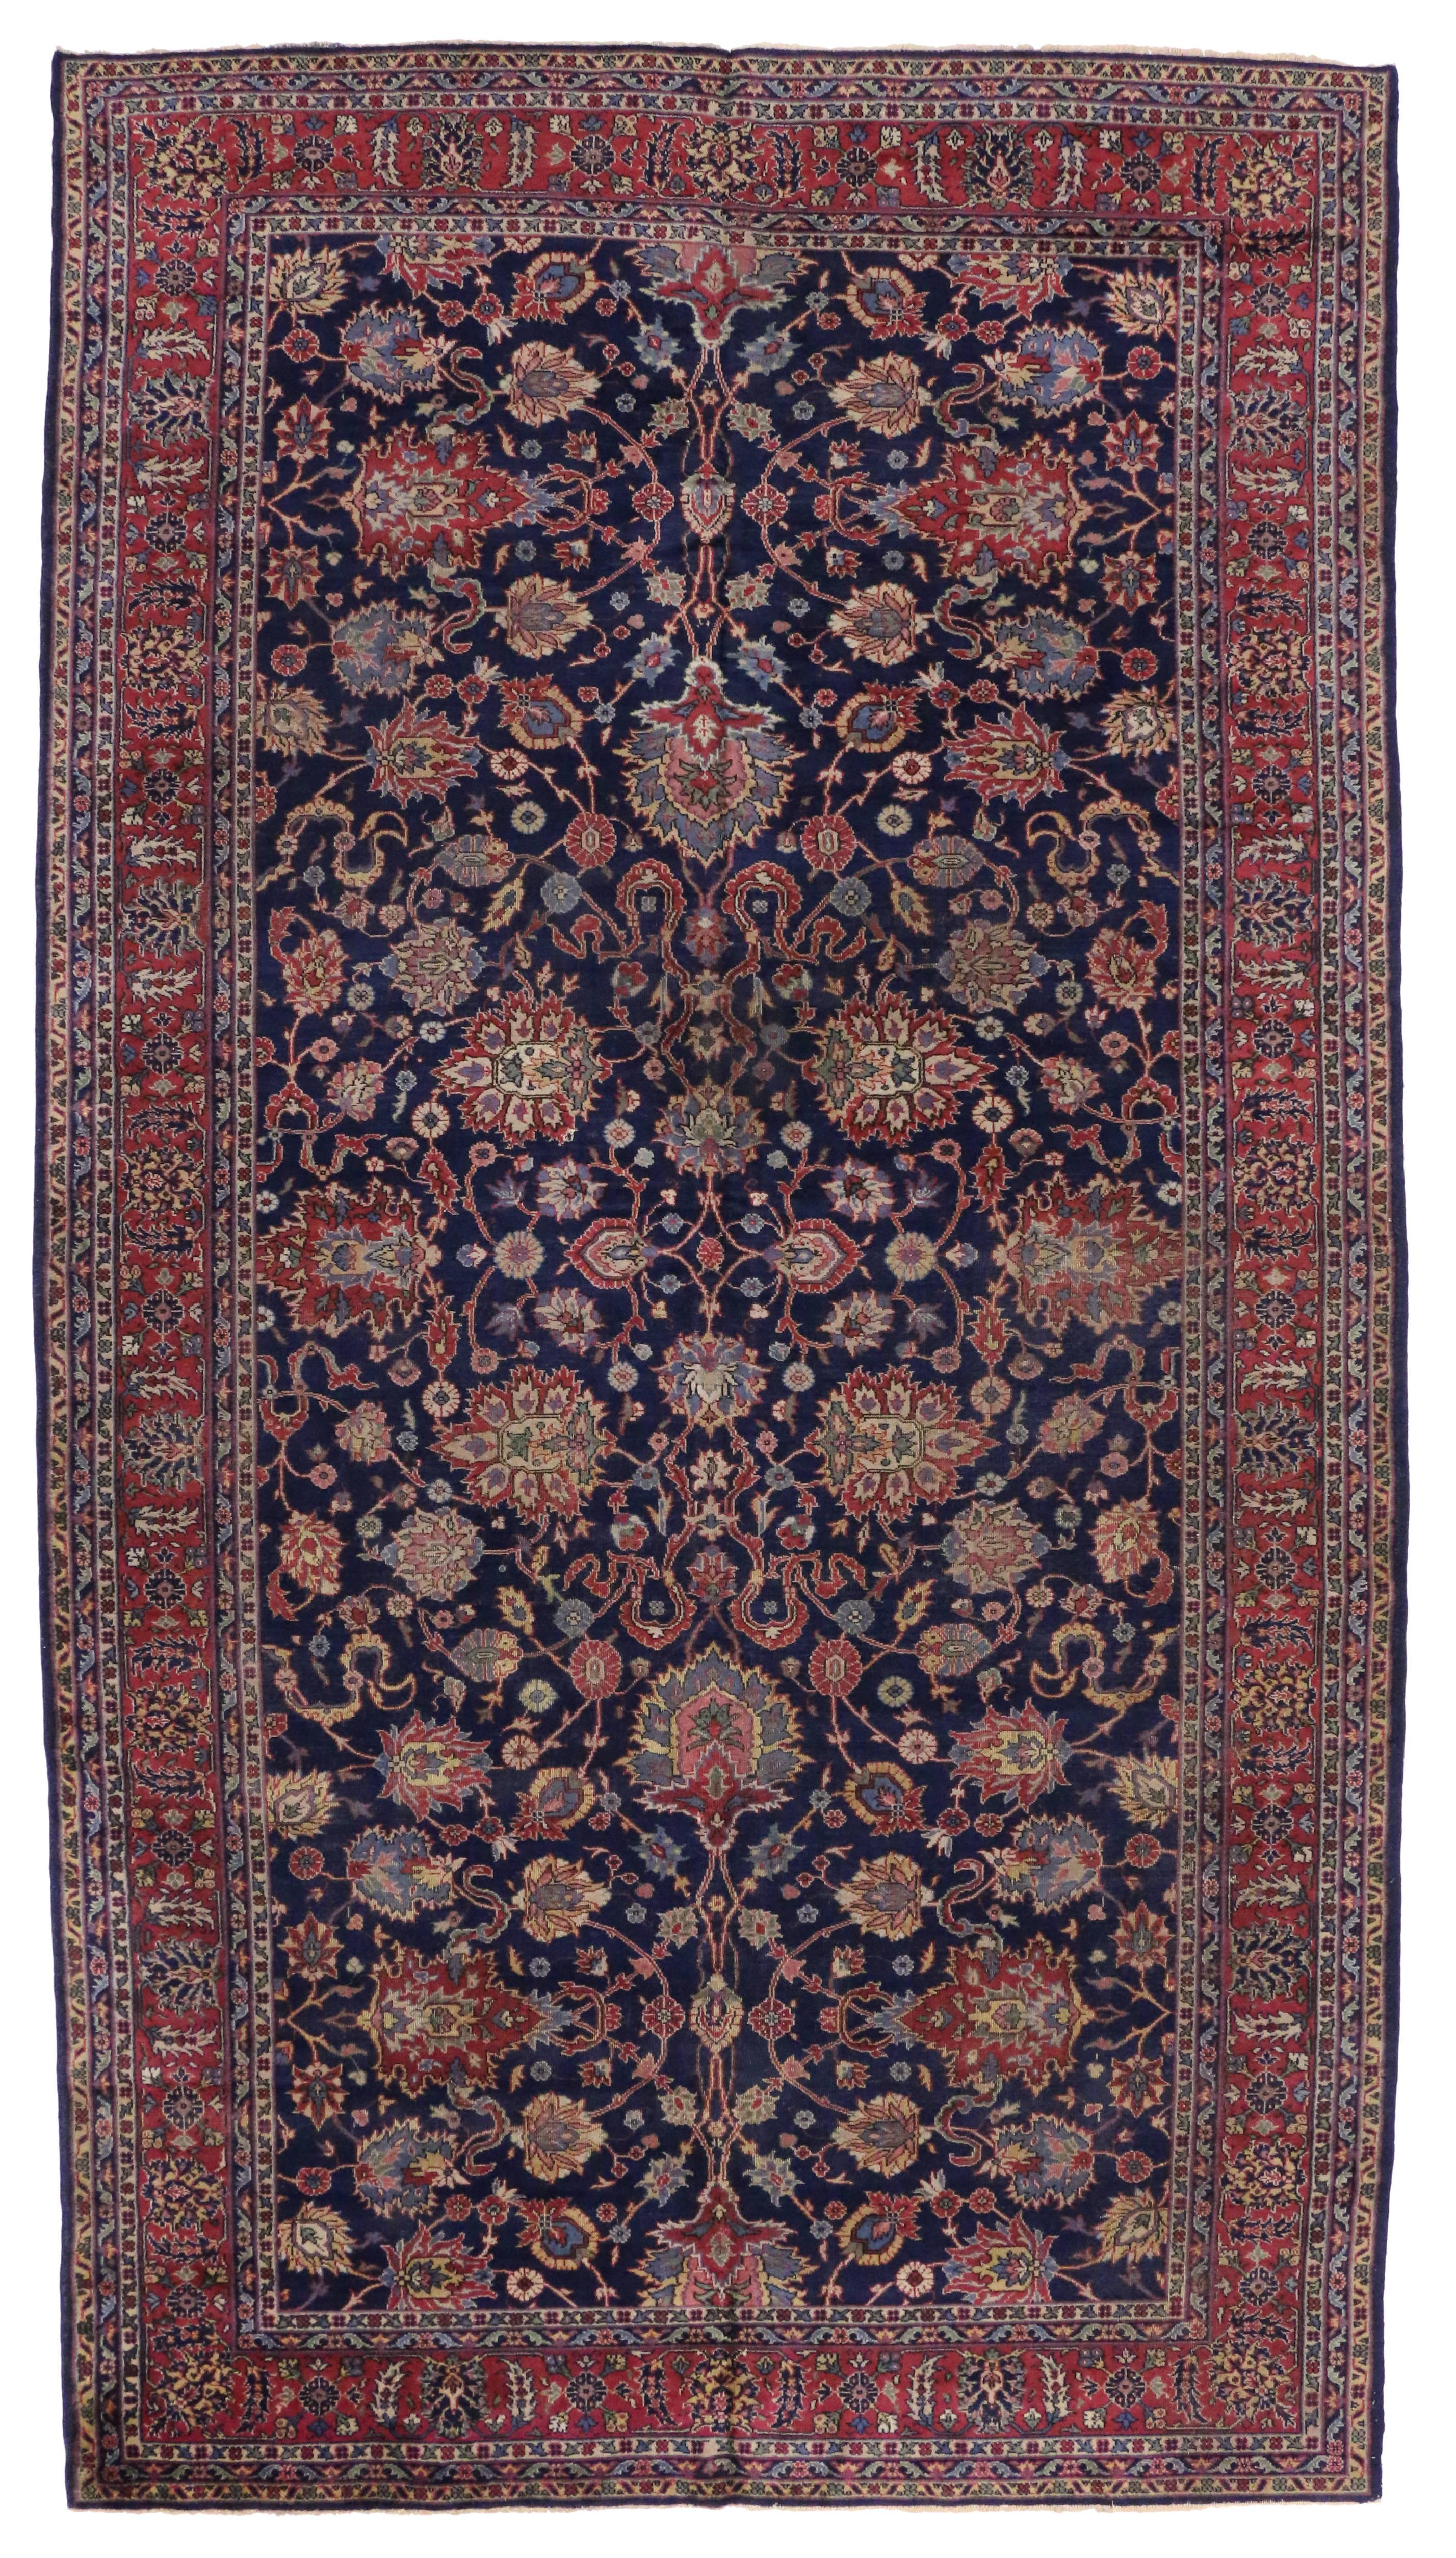 Antique Turkish Blue Sparta Gallery Rug with Old World French Chateau Style  3